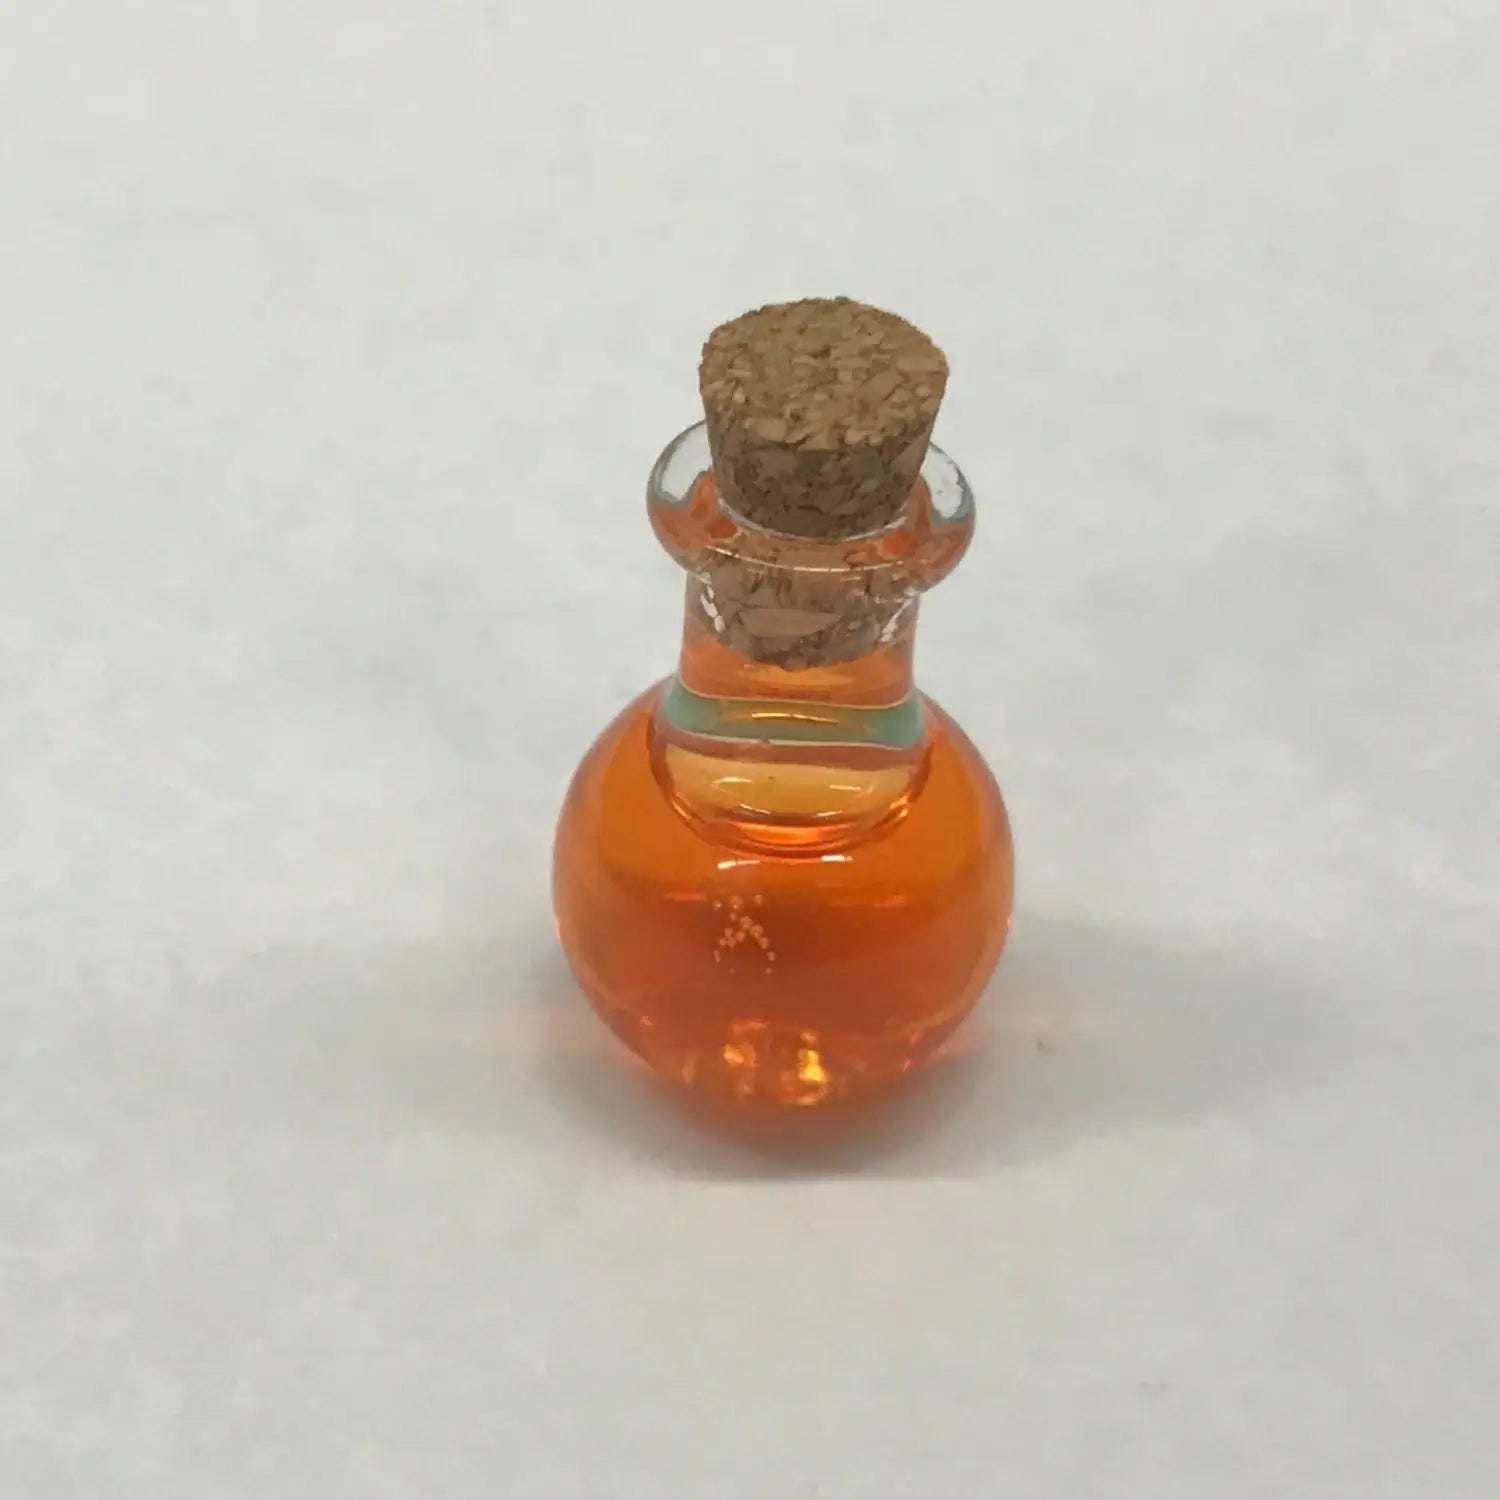 Tabletop Gaming Decorative Potions - Orange / Round - DnD